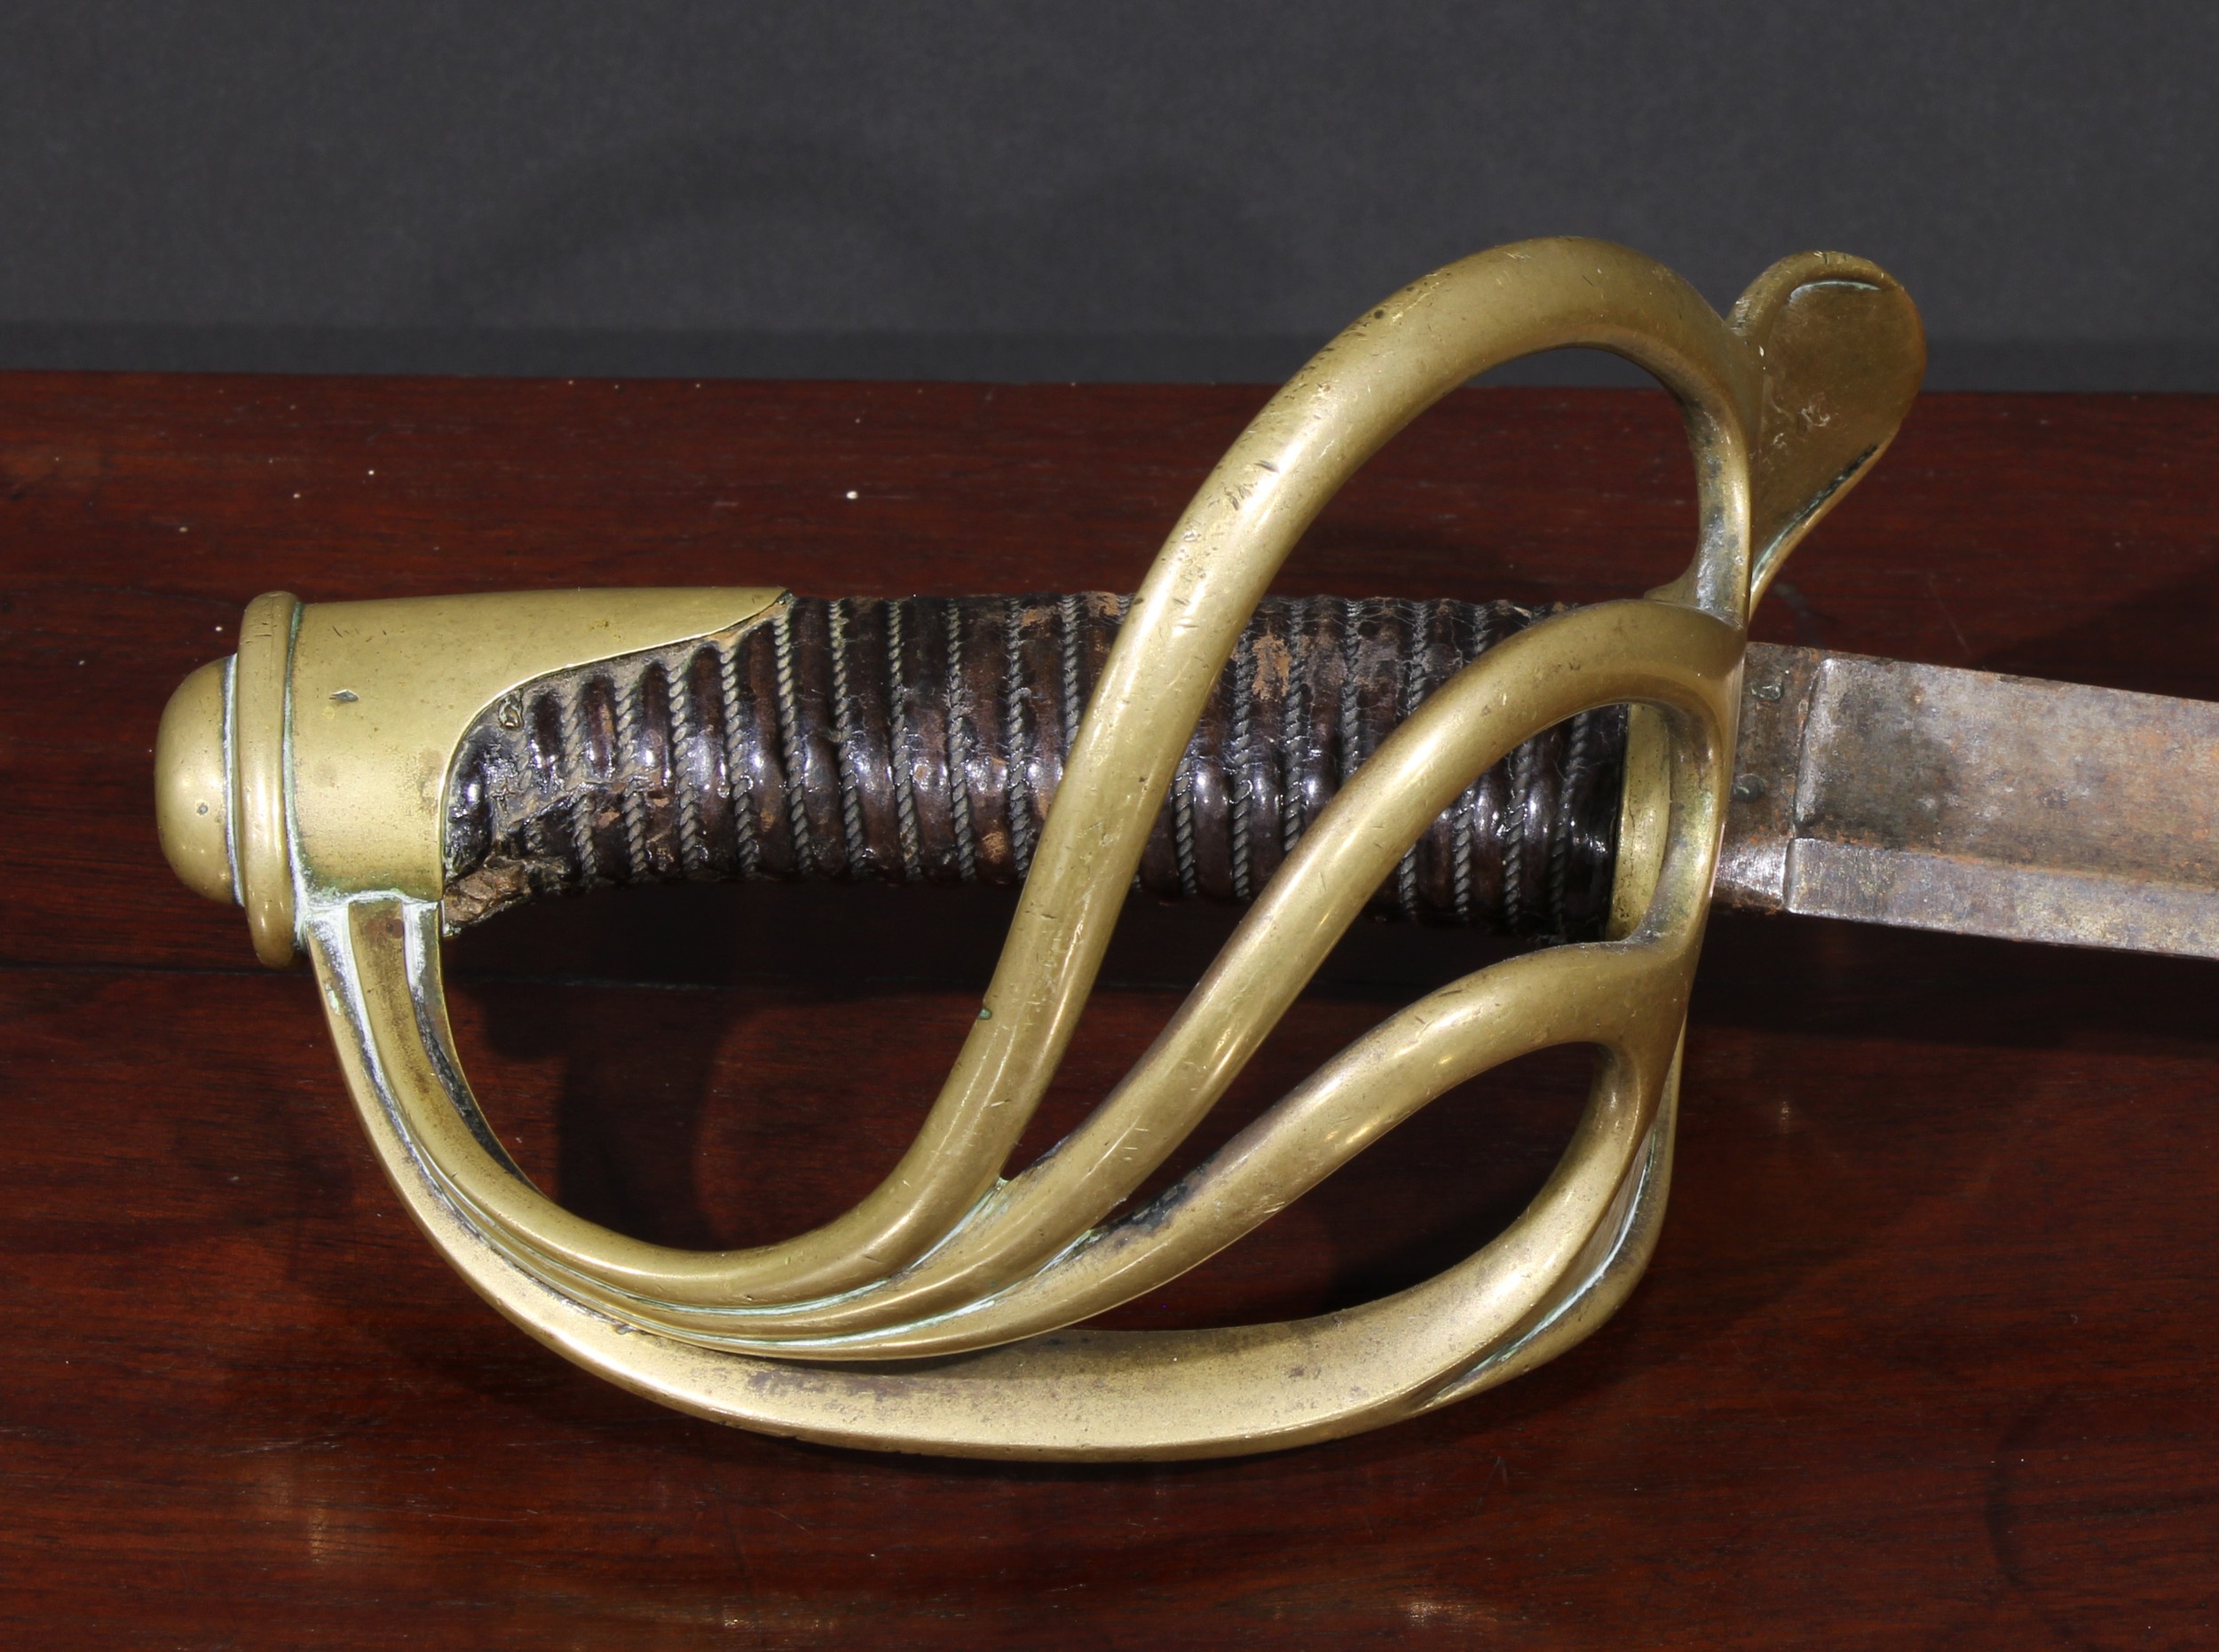 A 19th century French cavalry sword, 97.5cm curved fullered blade, brass hilt with armourer’s marks, - Image 3 of 3